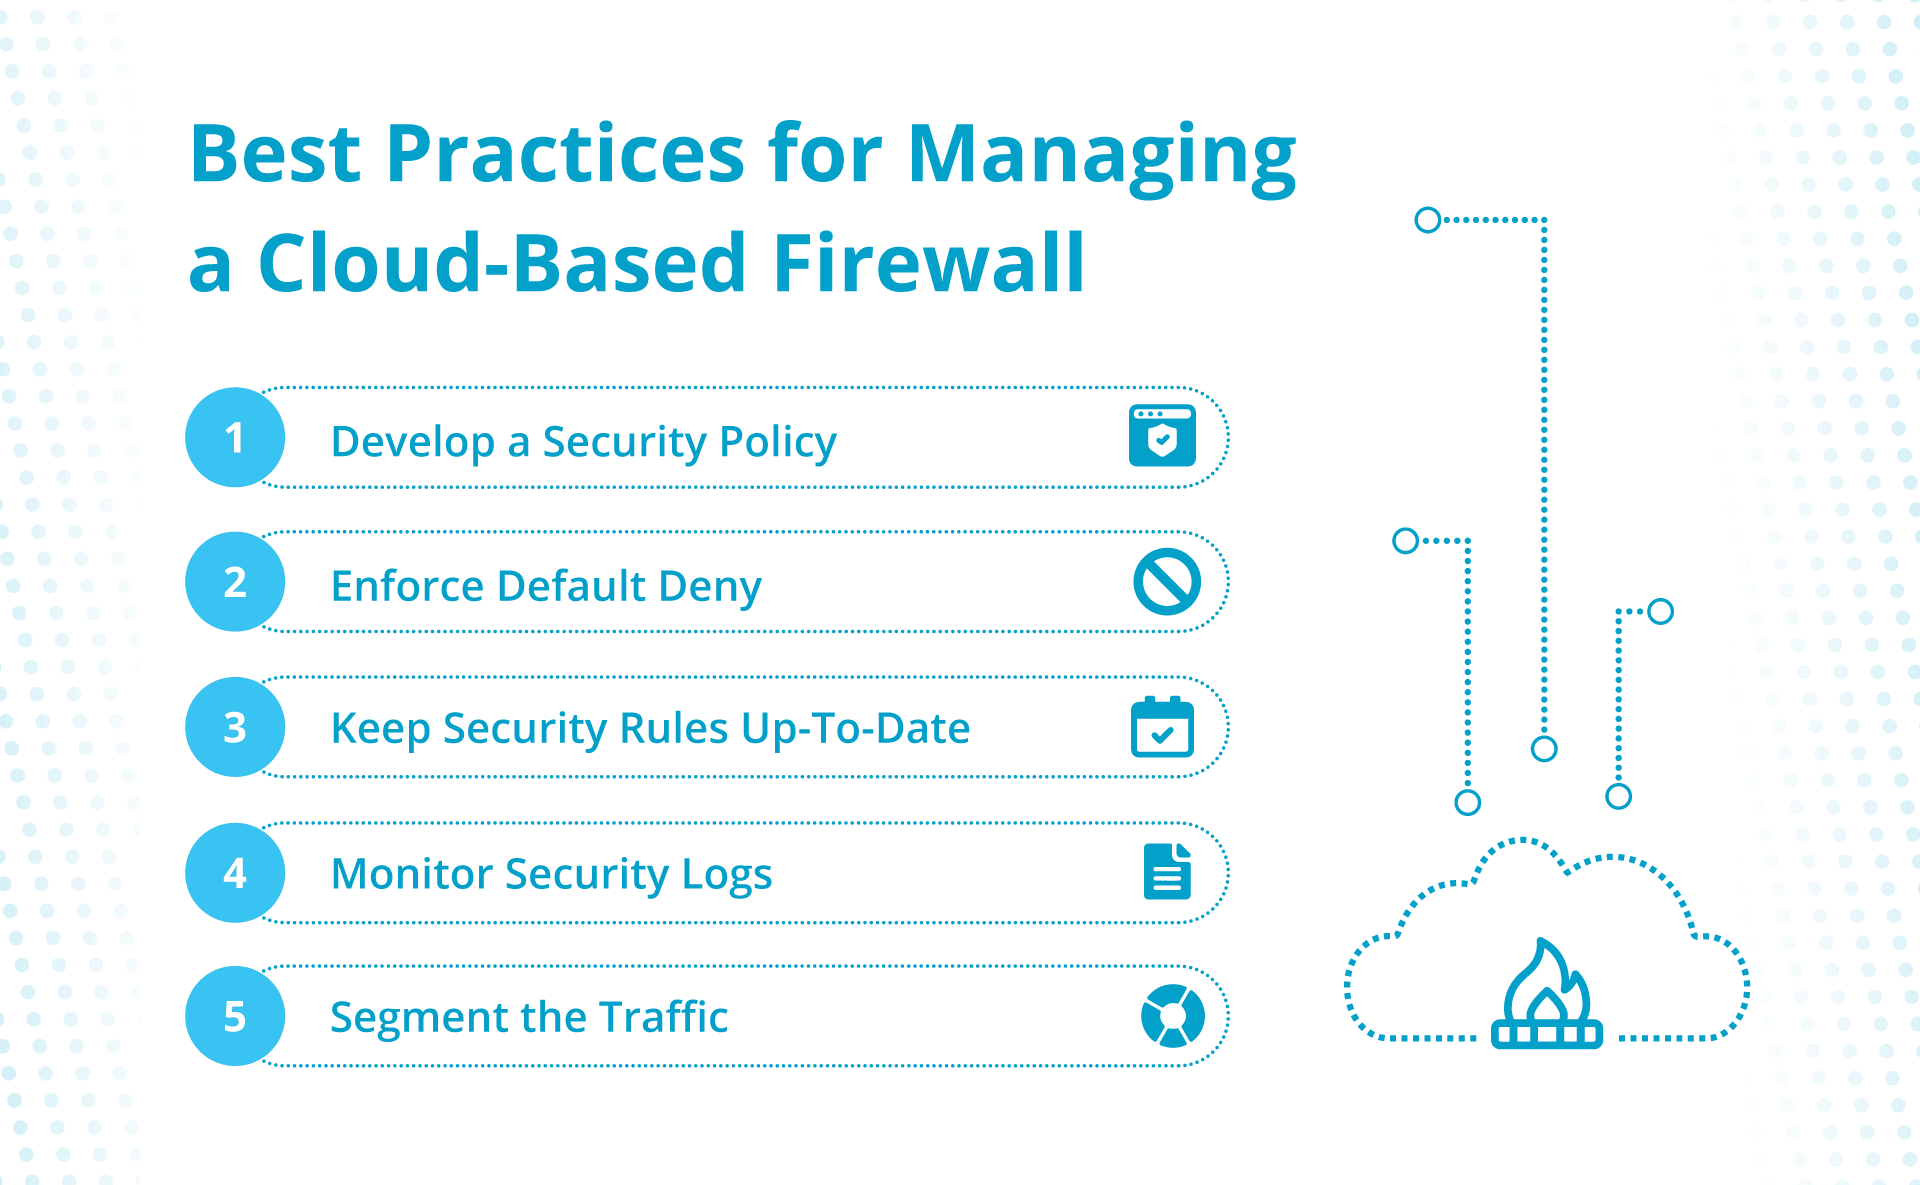 Best practices for managing a cloud-based firewall. 